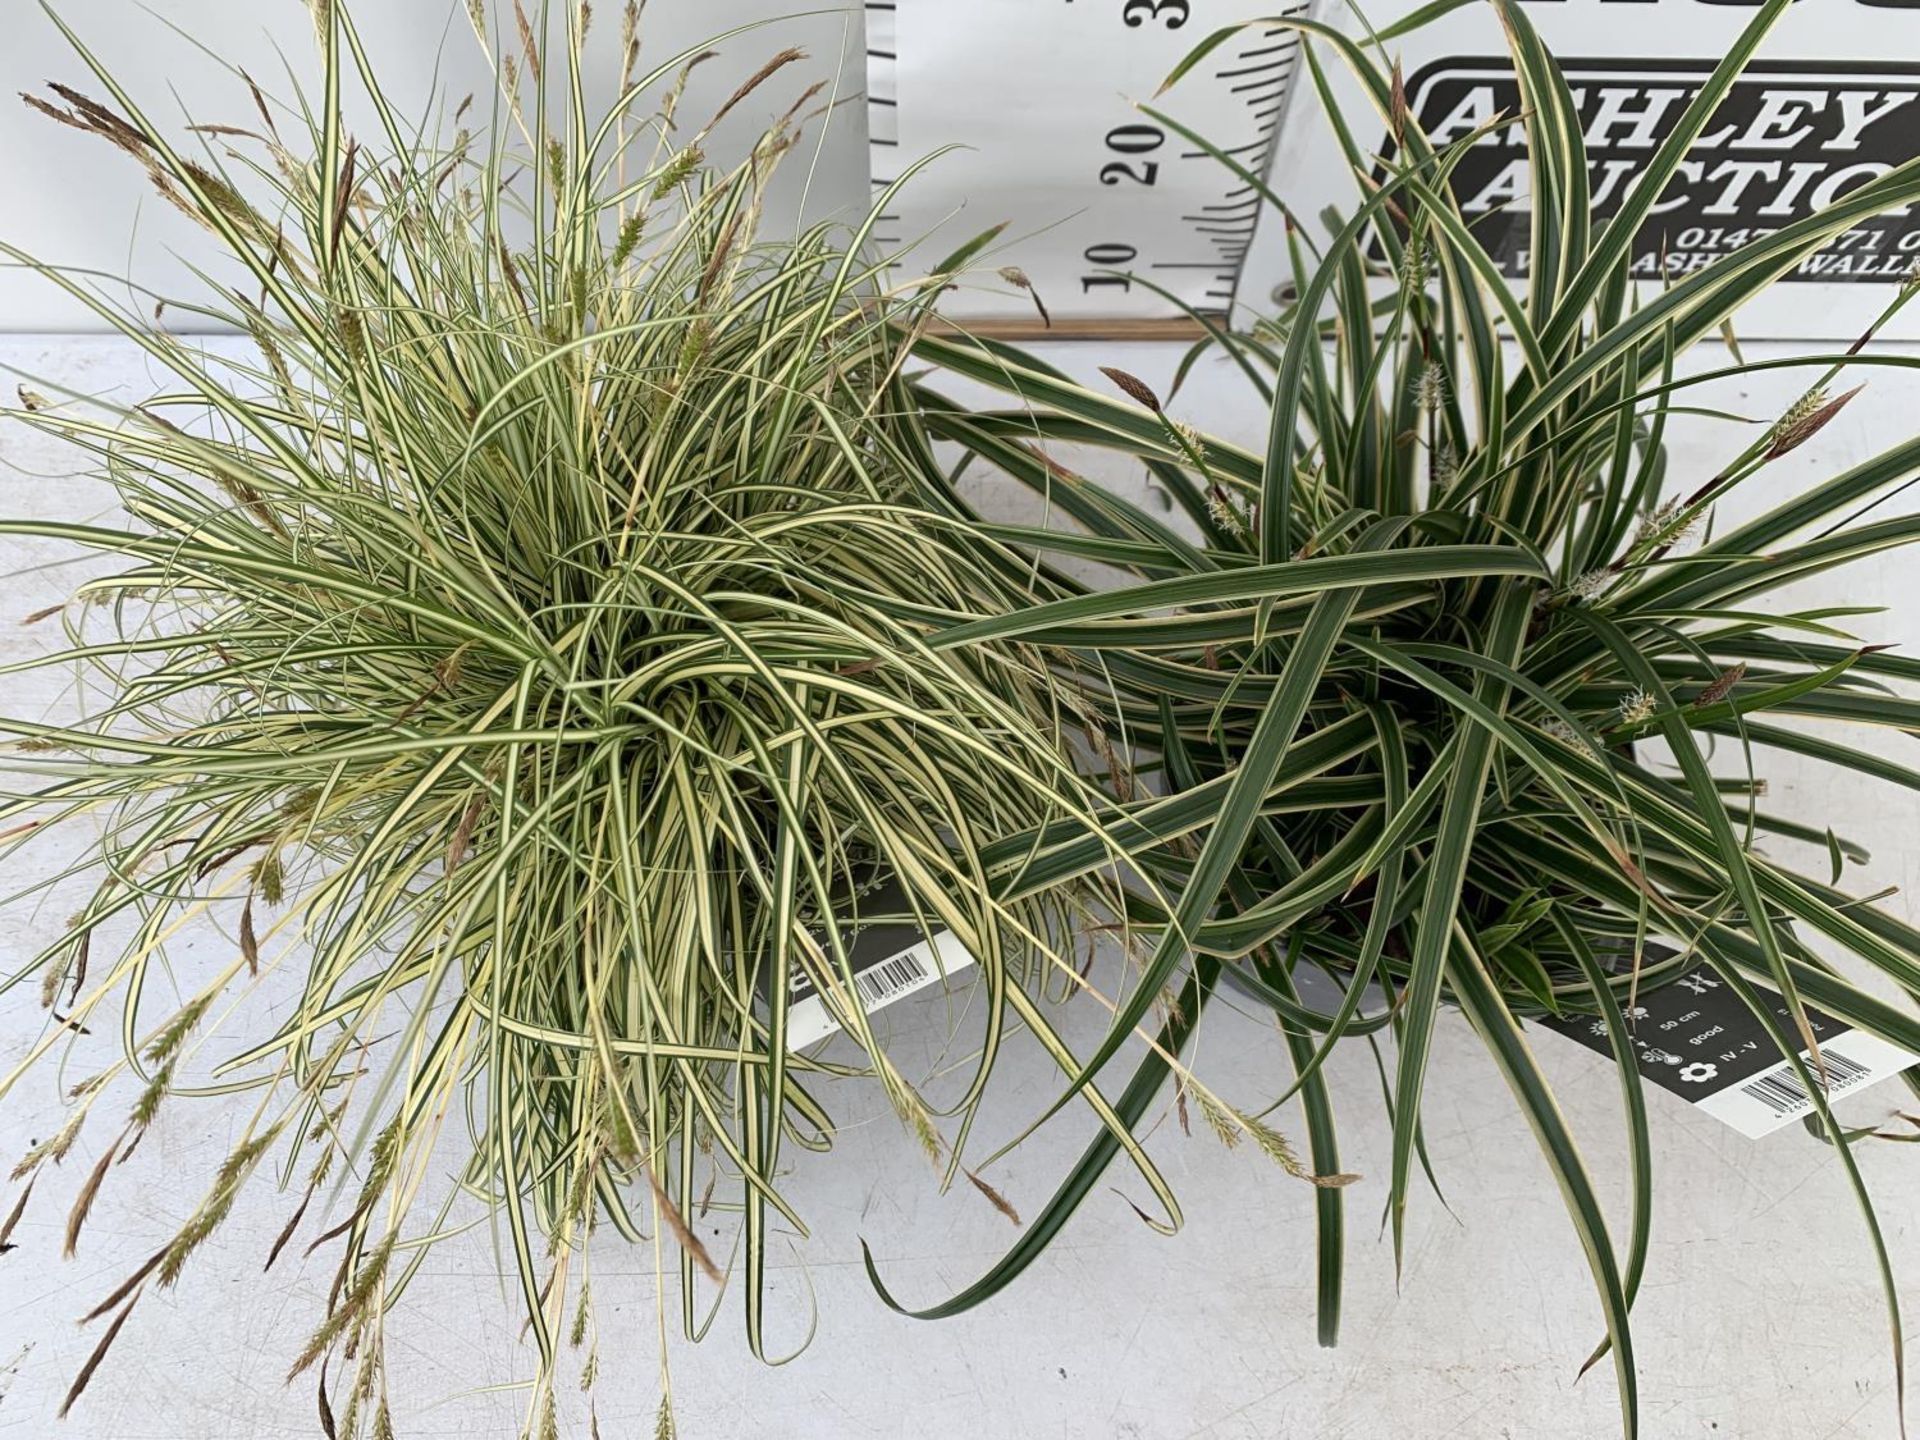 TWO HARDY ORNAMENTAL GRASSES CAREX 'EVERGOLD' AND MORROWII 'ICE DANCE' IN 3 LTR POTS APPROX 50CM - Image 2 of 5